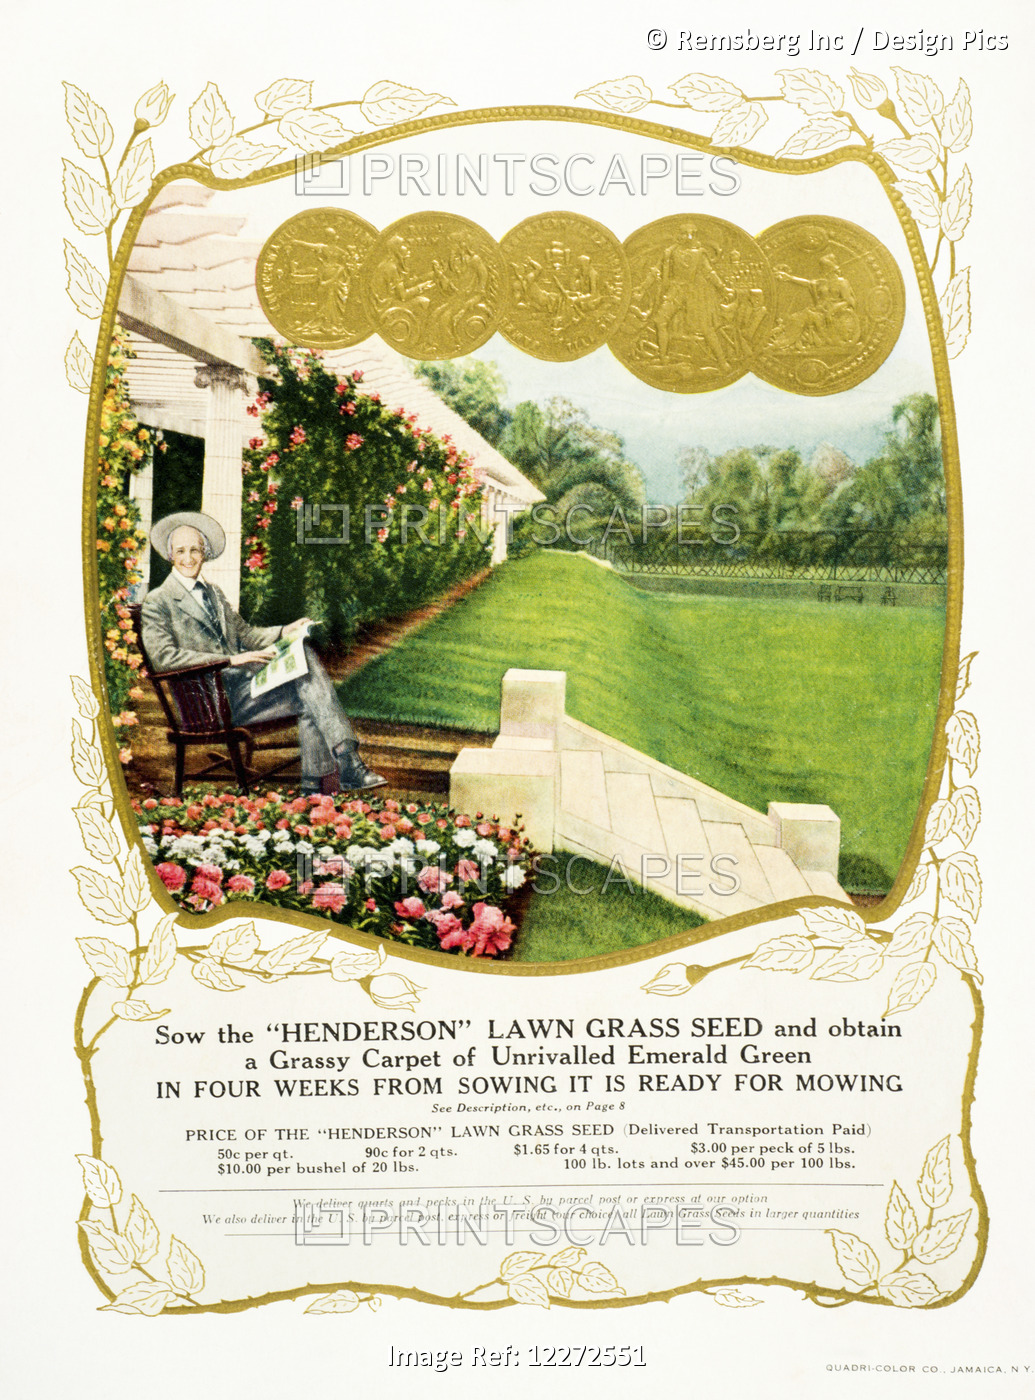 Historic Henderson Lawn Grass Seed Advertisement From 20th Century.